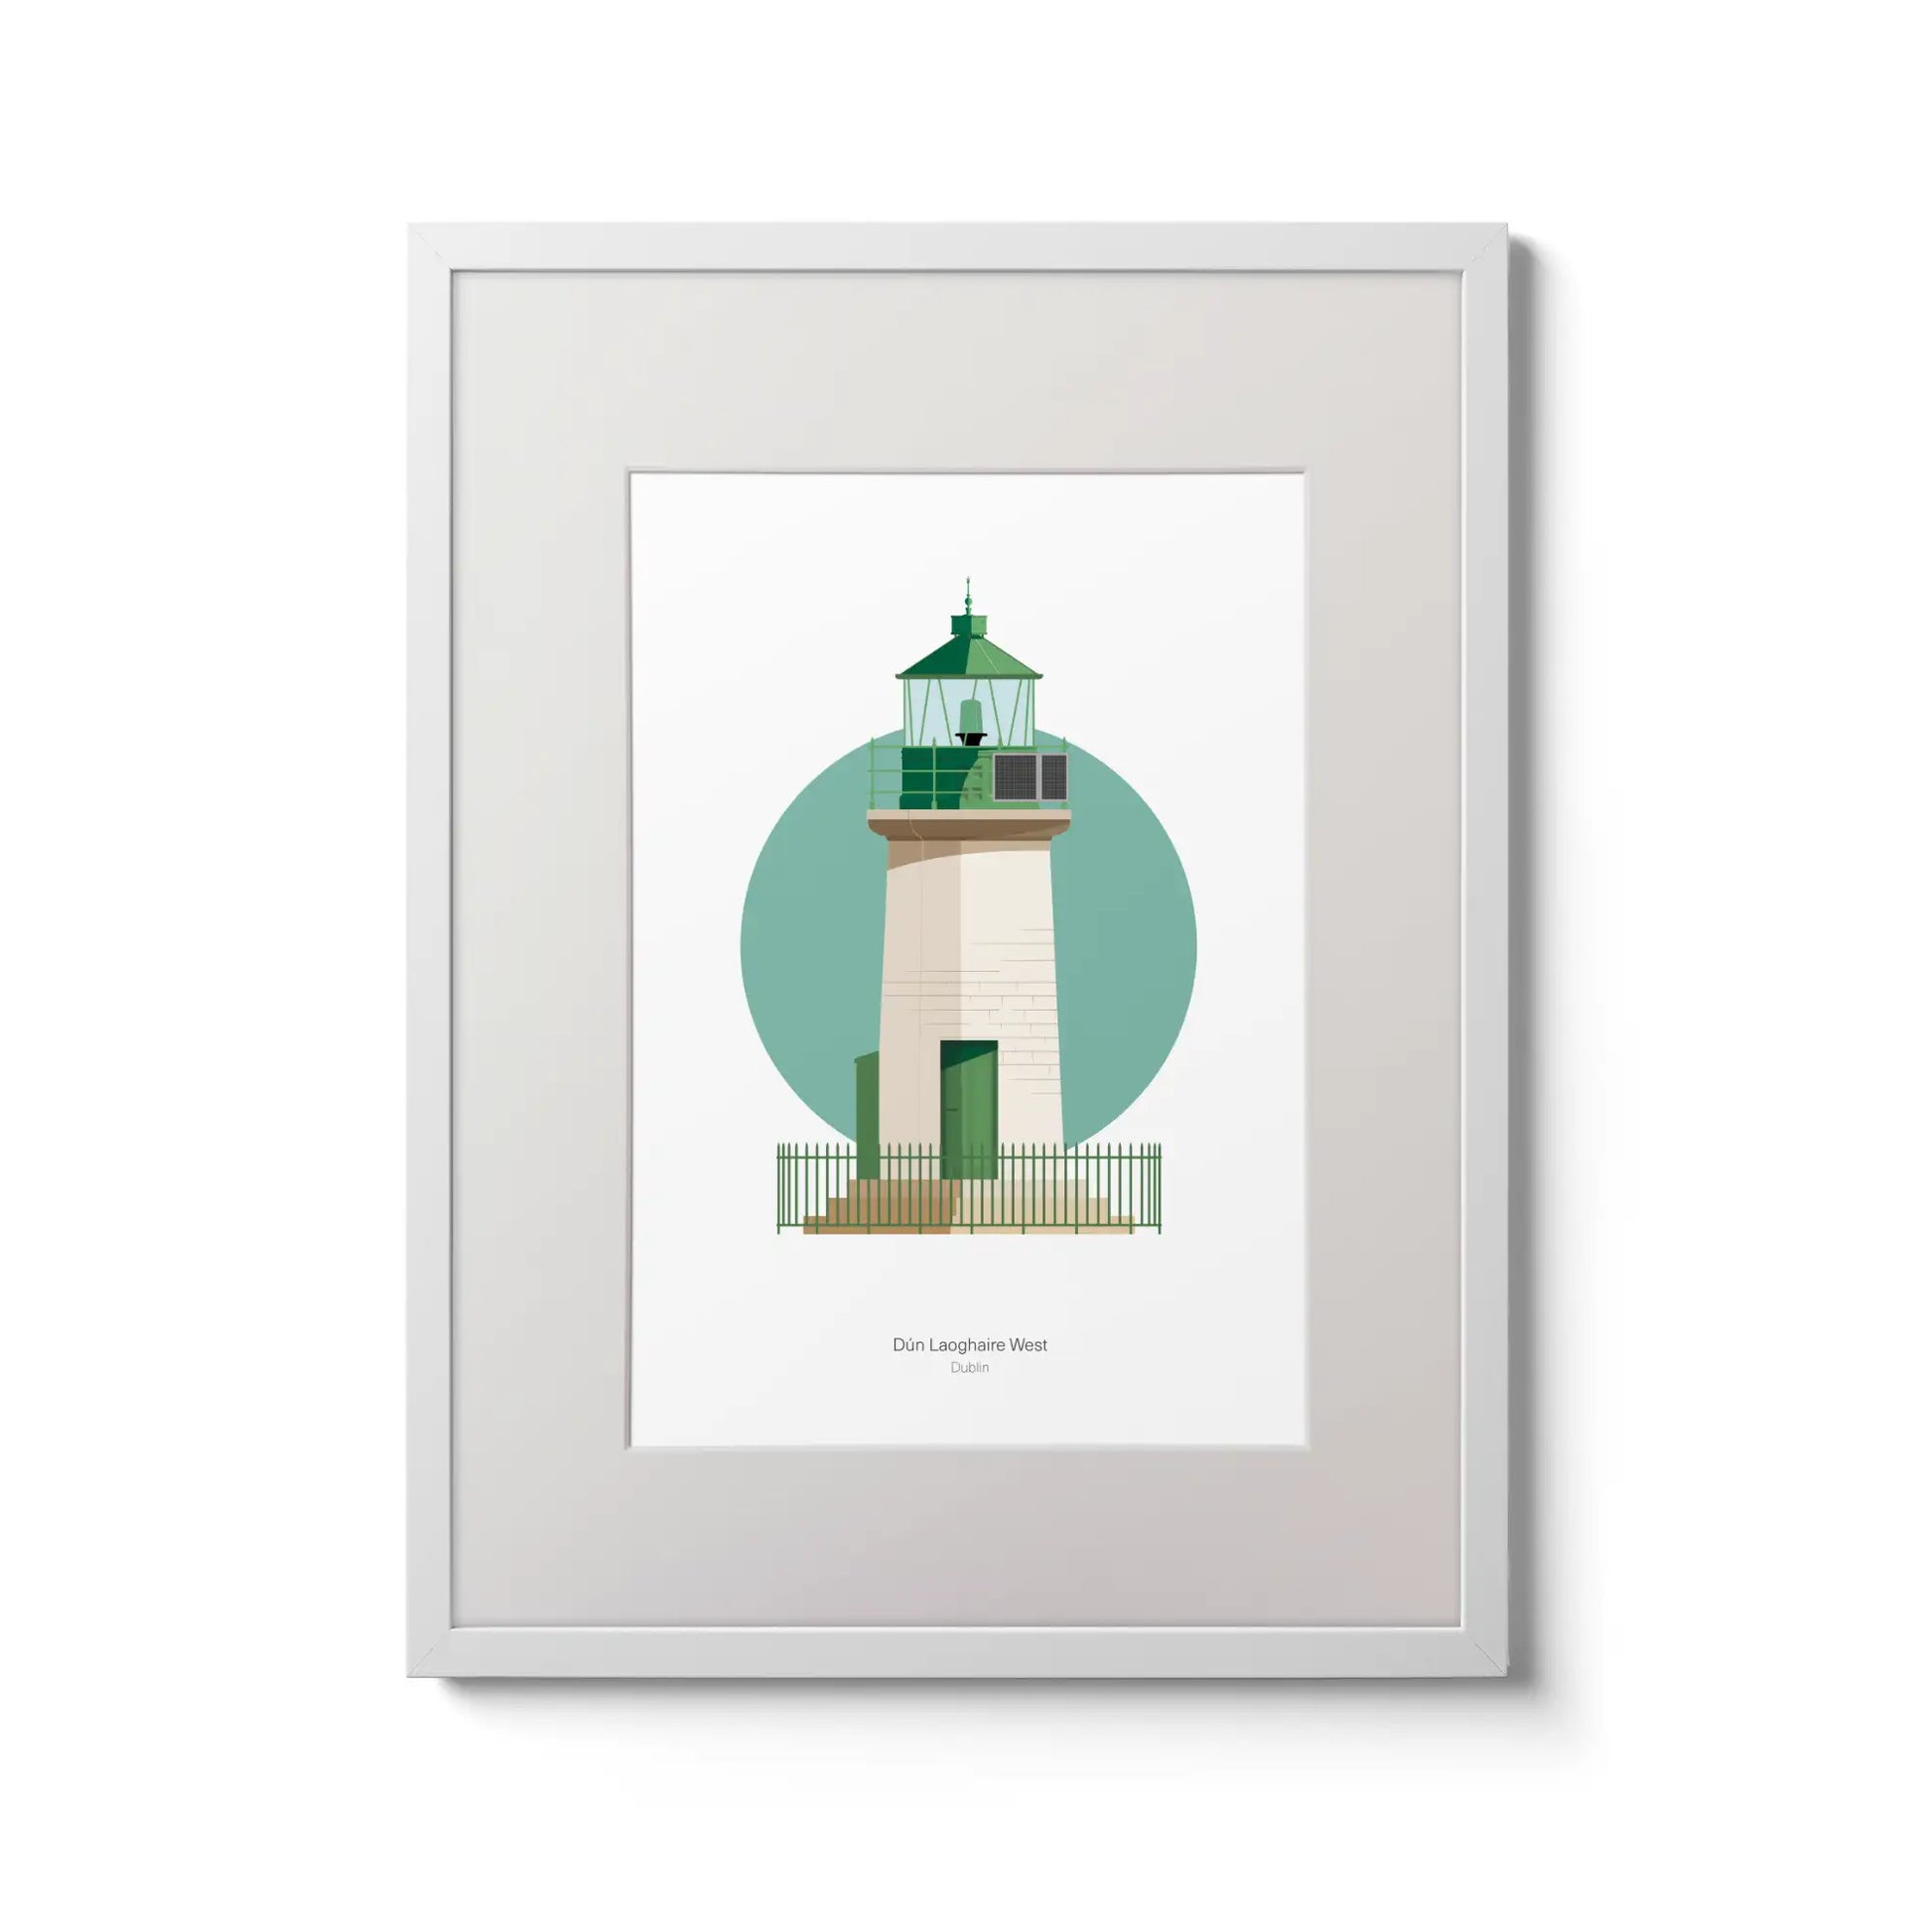 Illustration of Dún Laoghaire West lighthouse on a white background inside light blue square,  in a white frame measuring 30x40cm.